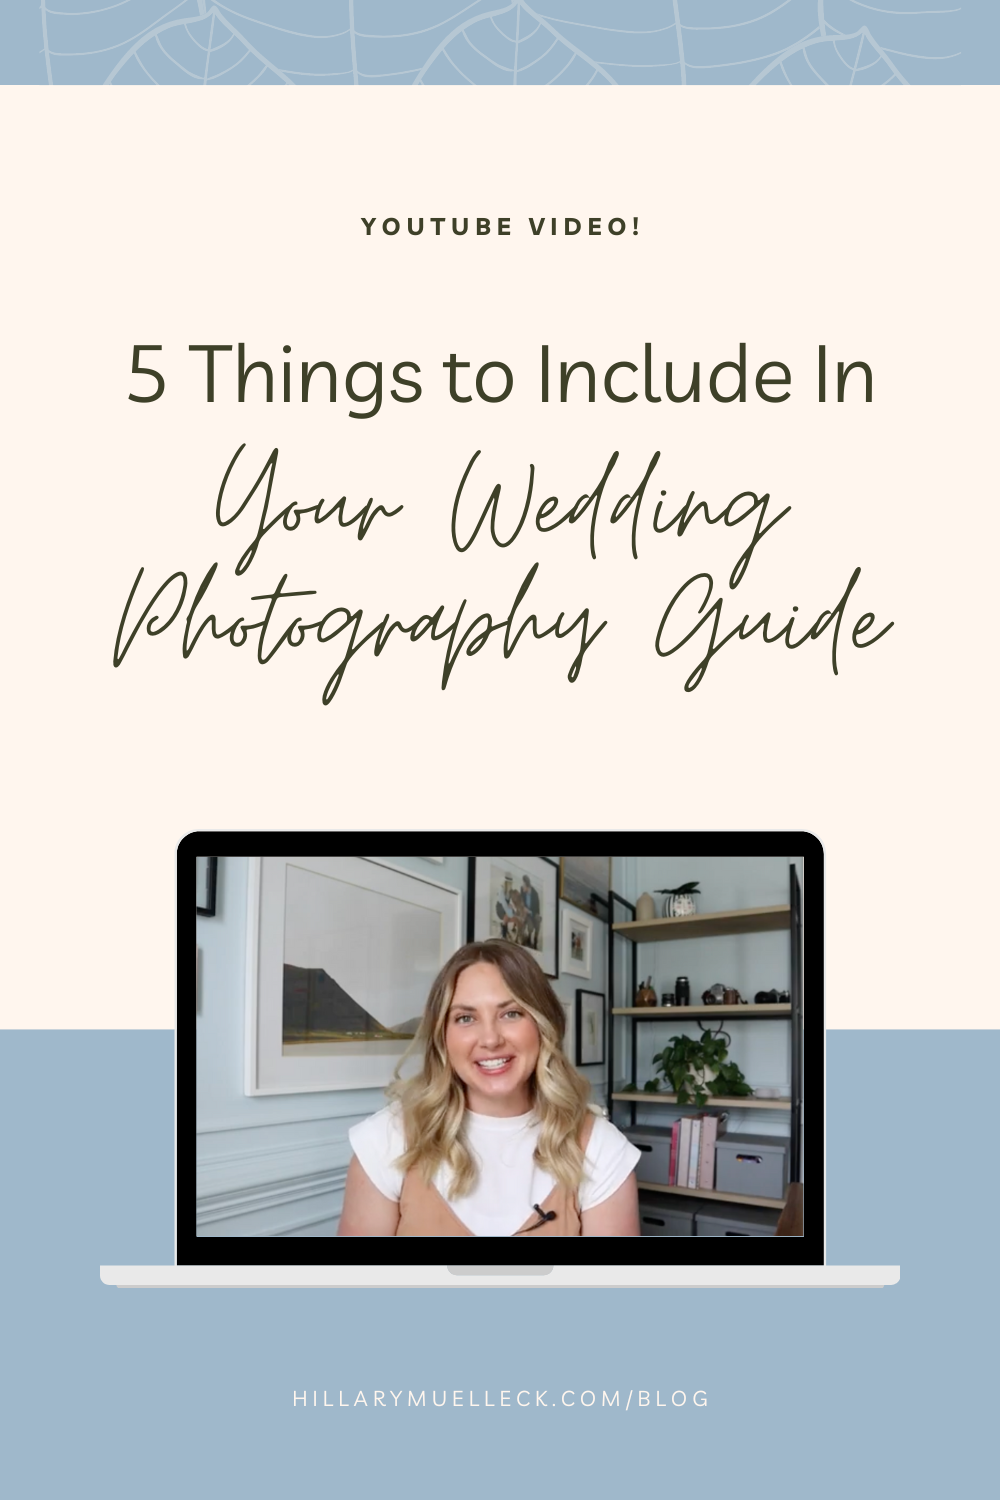 5 things to include in your wedding planning photography guide for your photography clients, shared by photography educator Hillary Muelleck